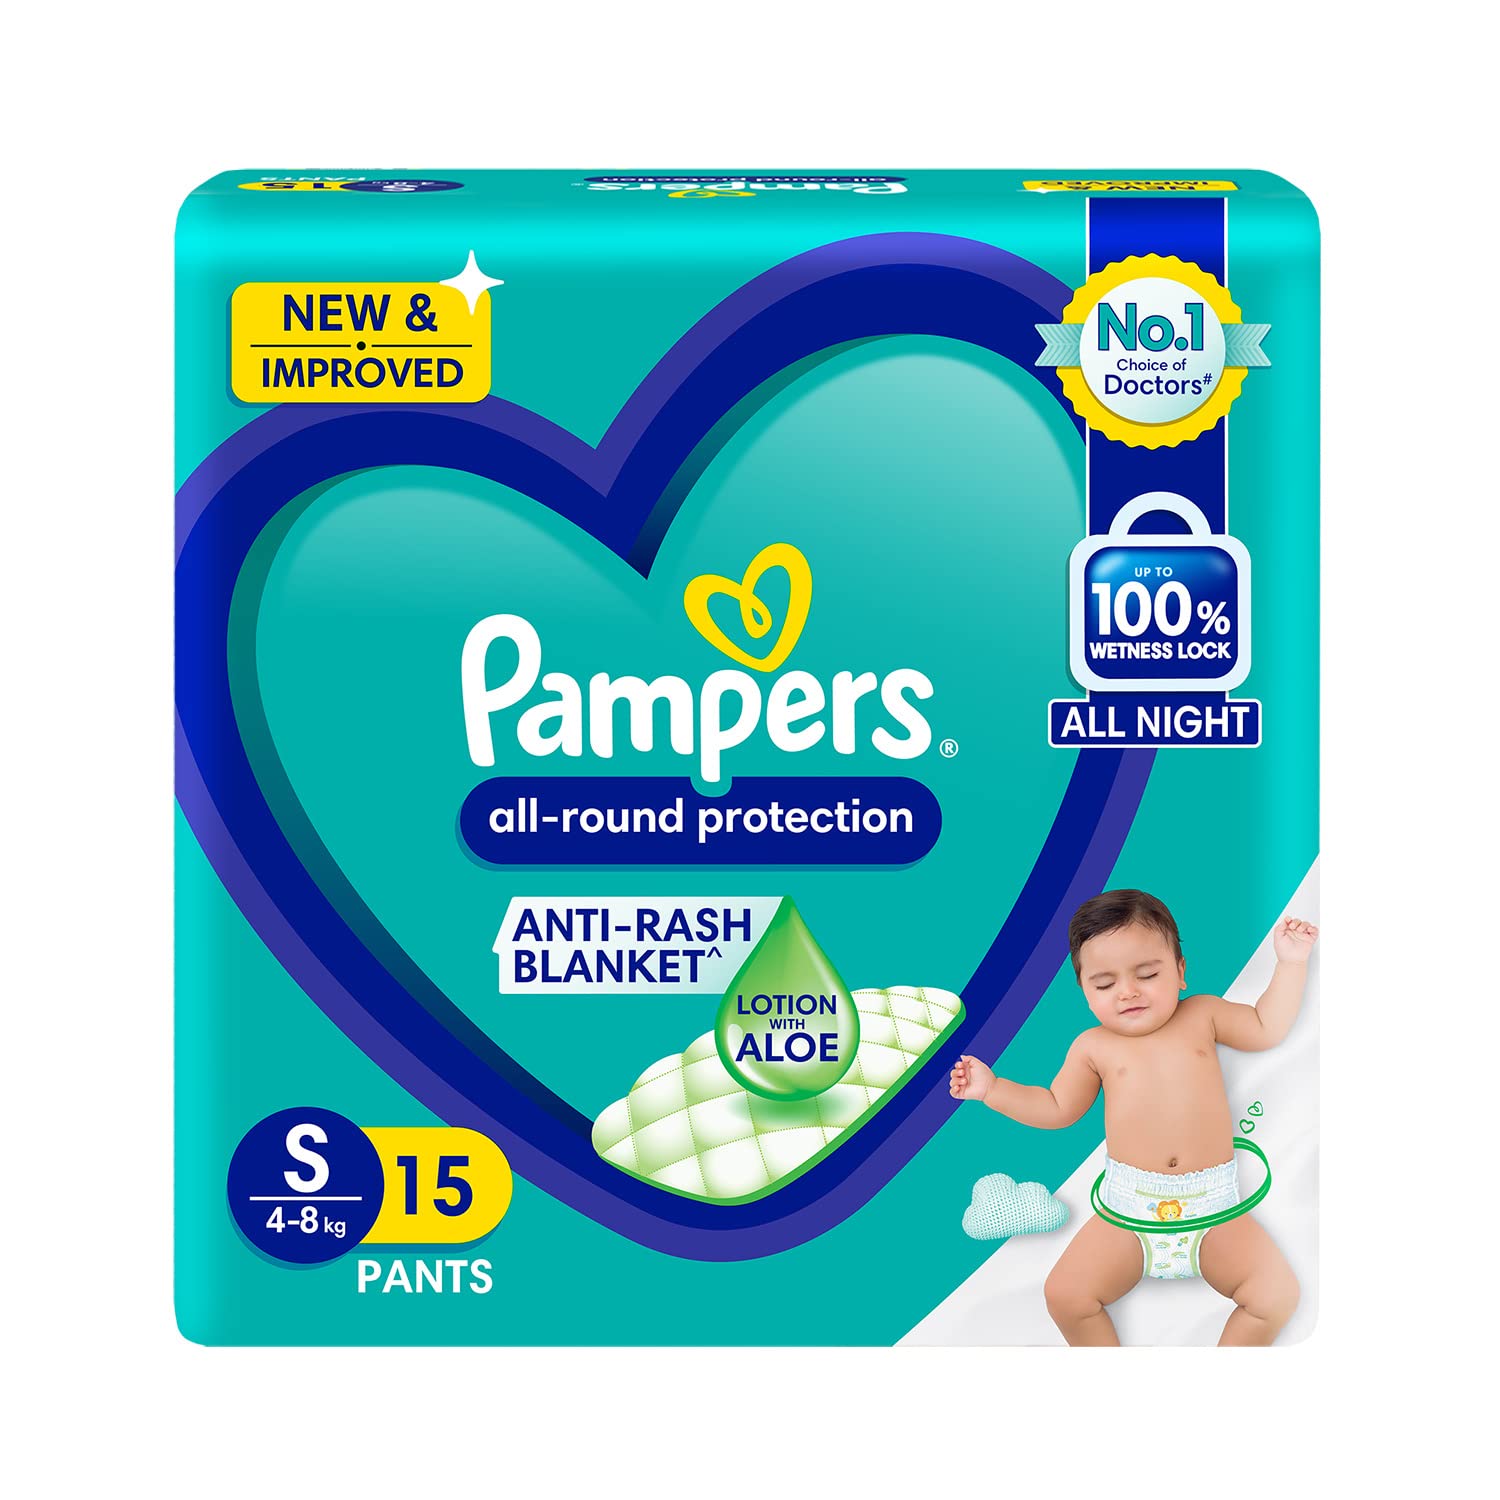 Pampers All-Round Protection Diaper Pants Small (S) 15 Count